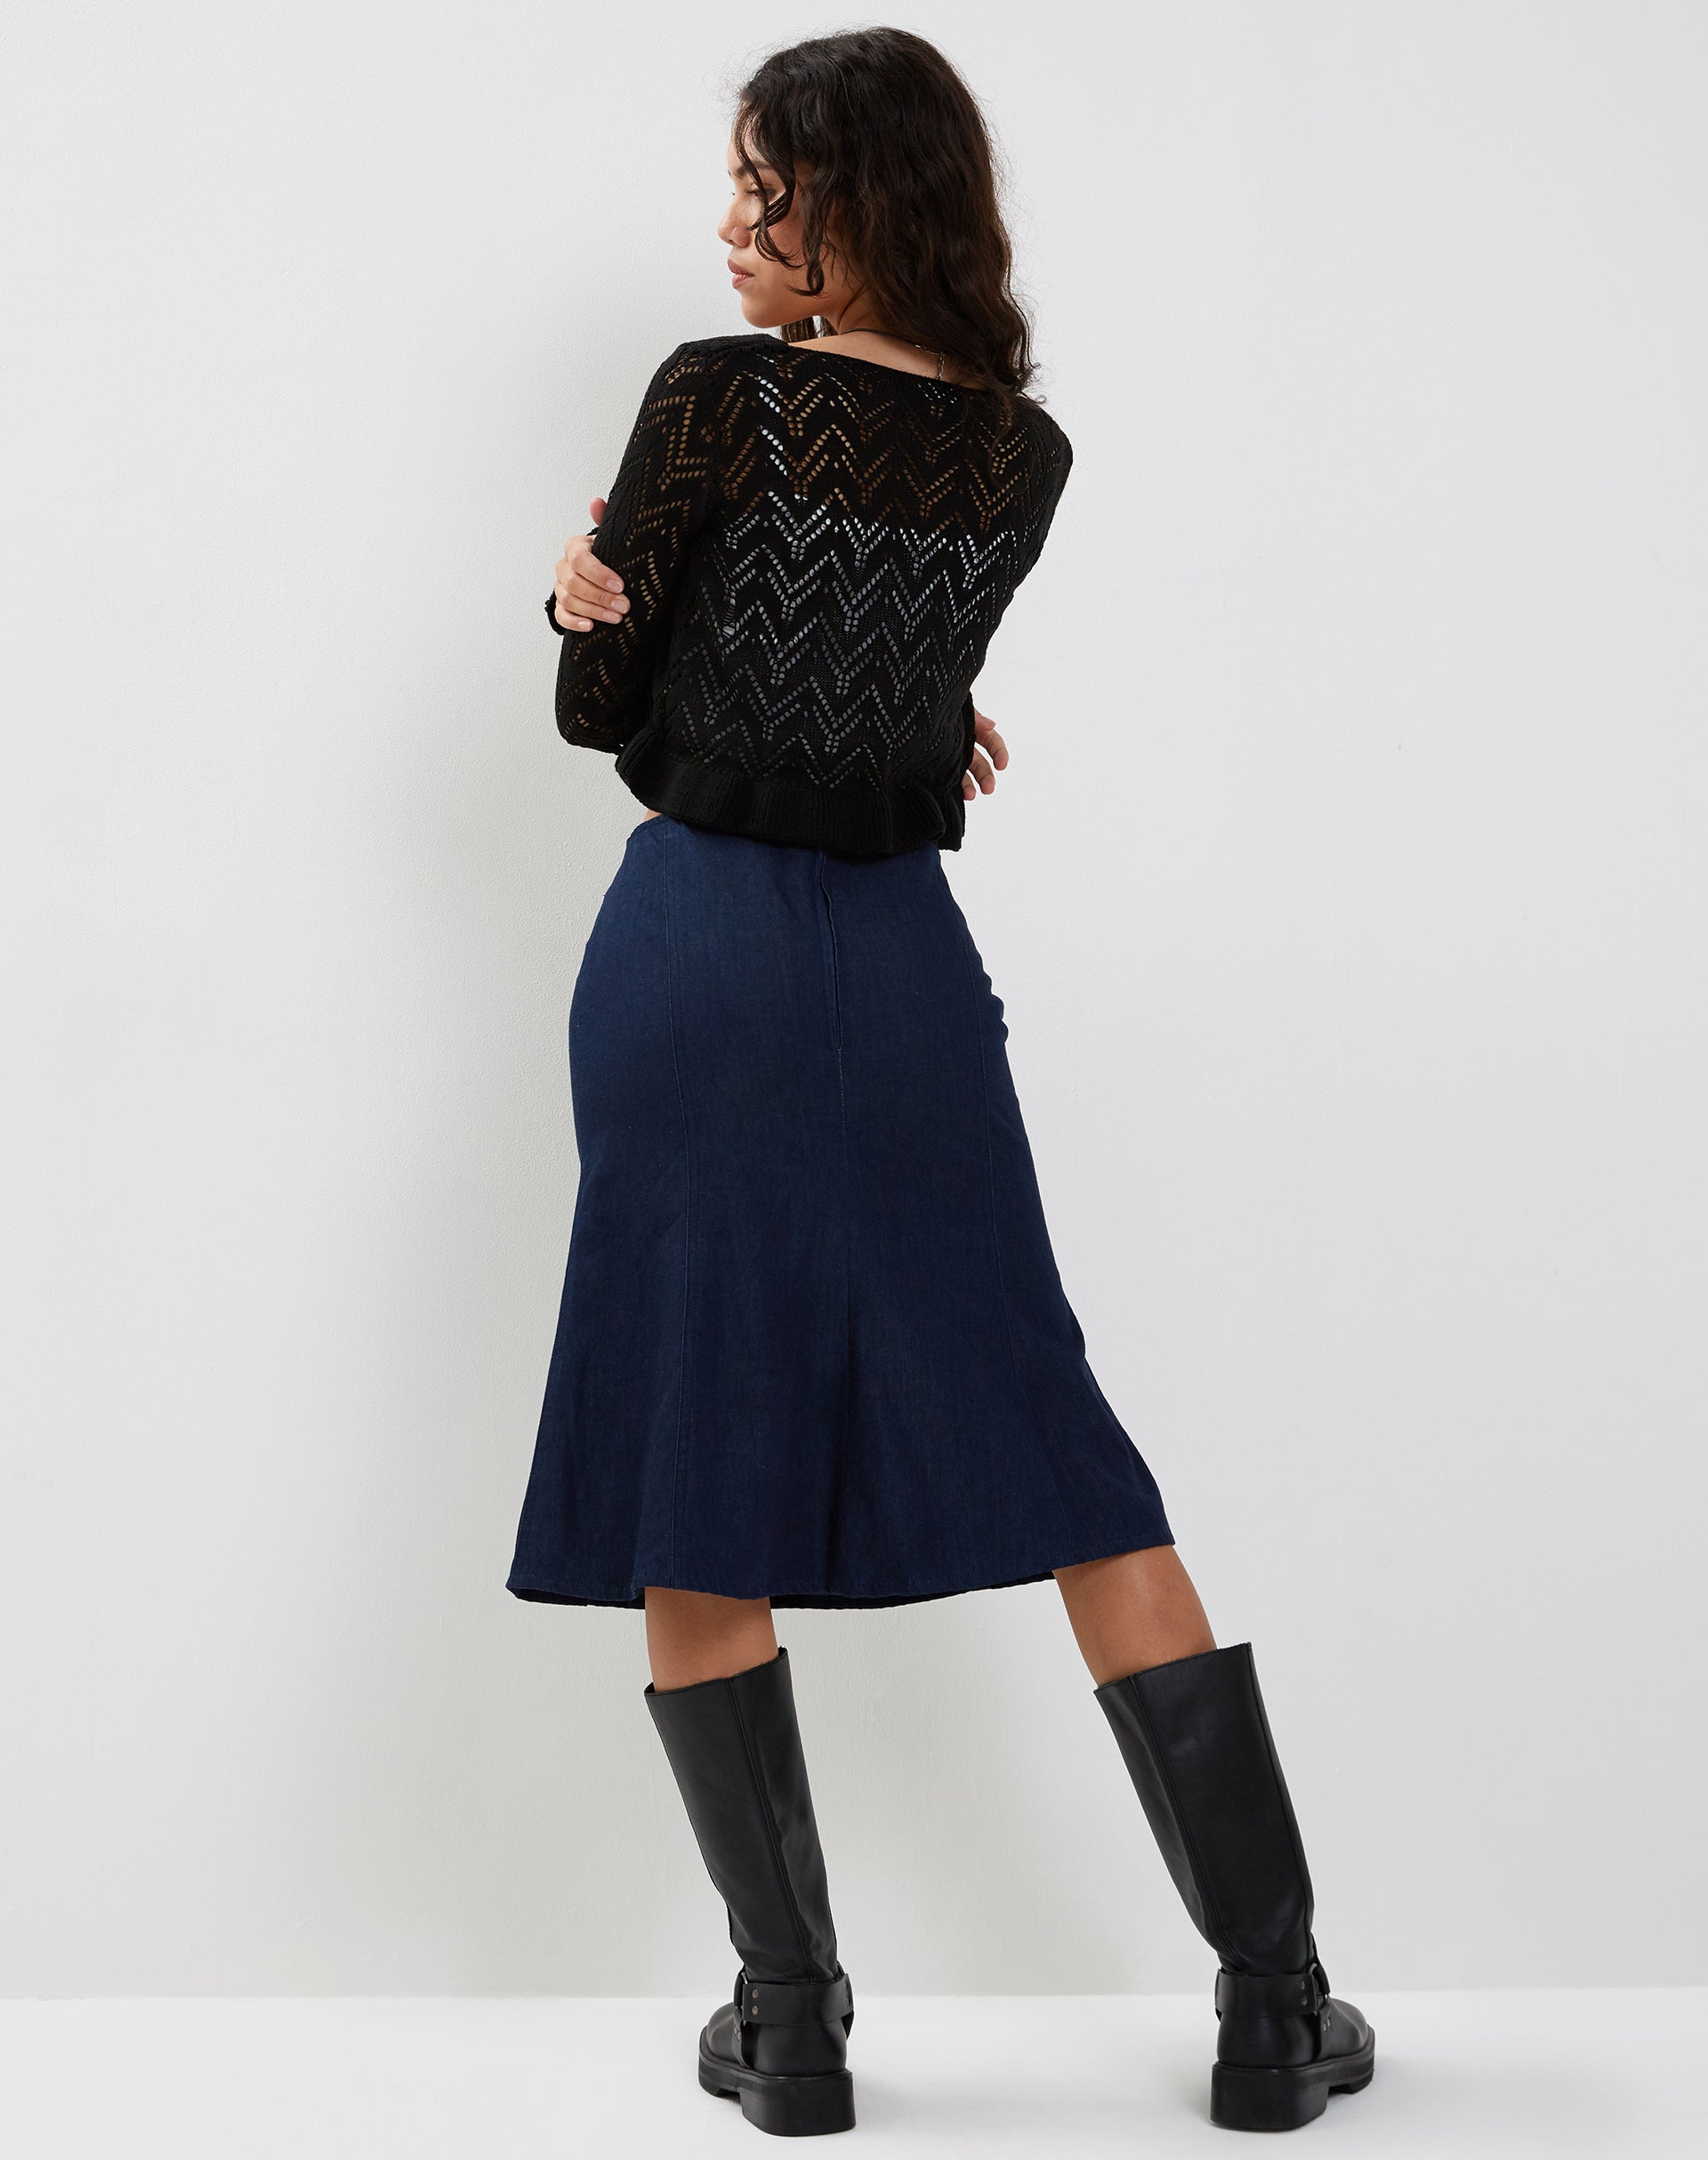 Image of Vella Cardigan in Knitted Black